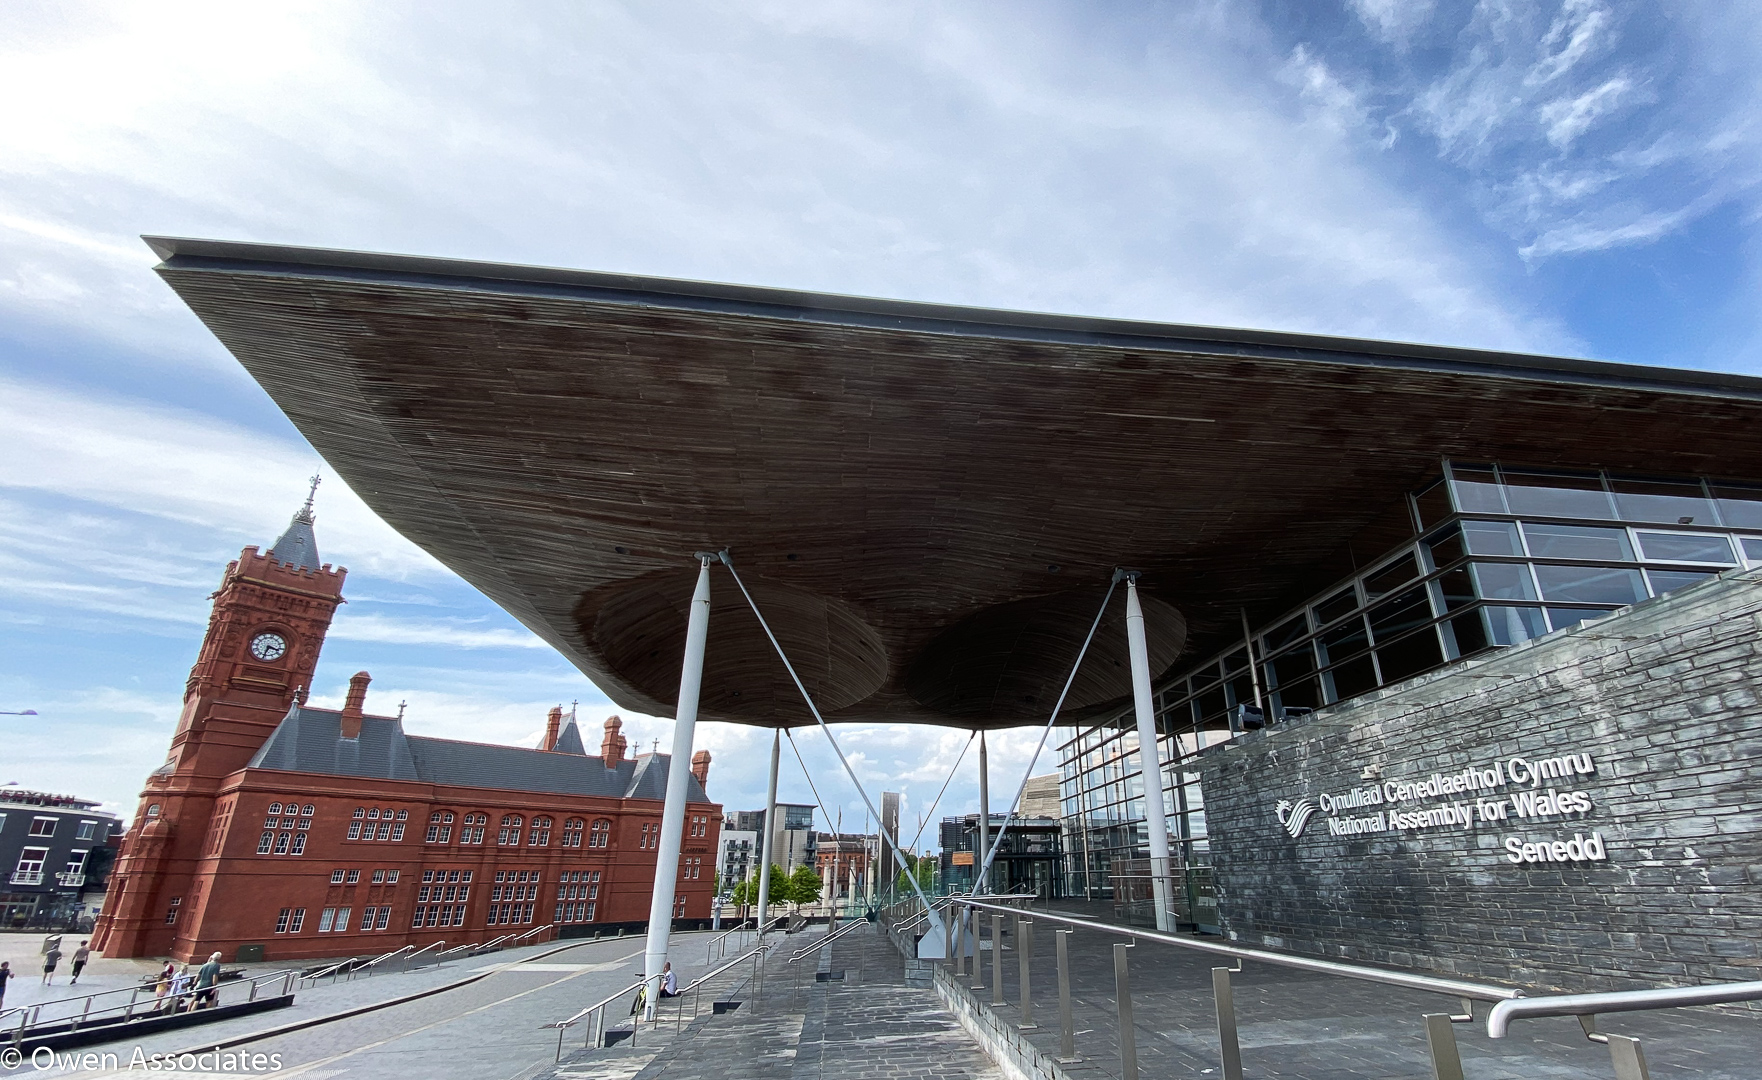 The National Assembly for Wales has changed its name to Senedd Cymru - the Welsh Parliament.